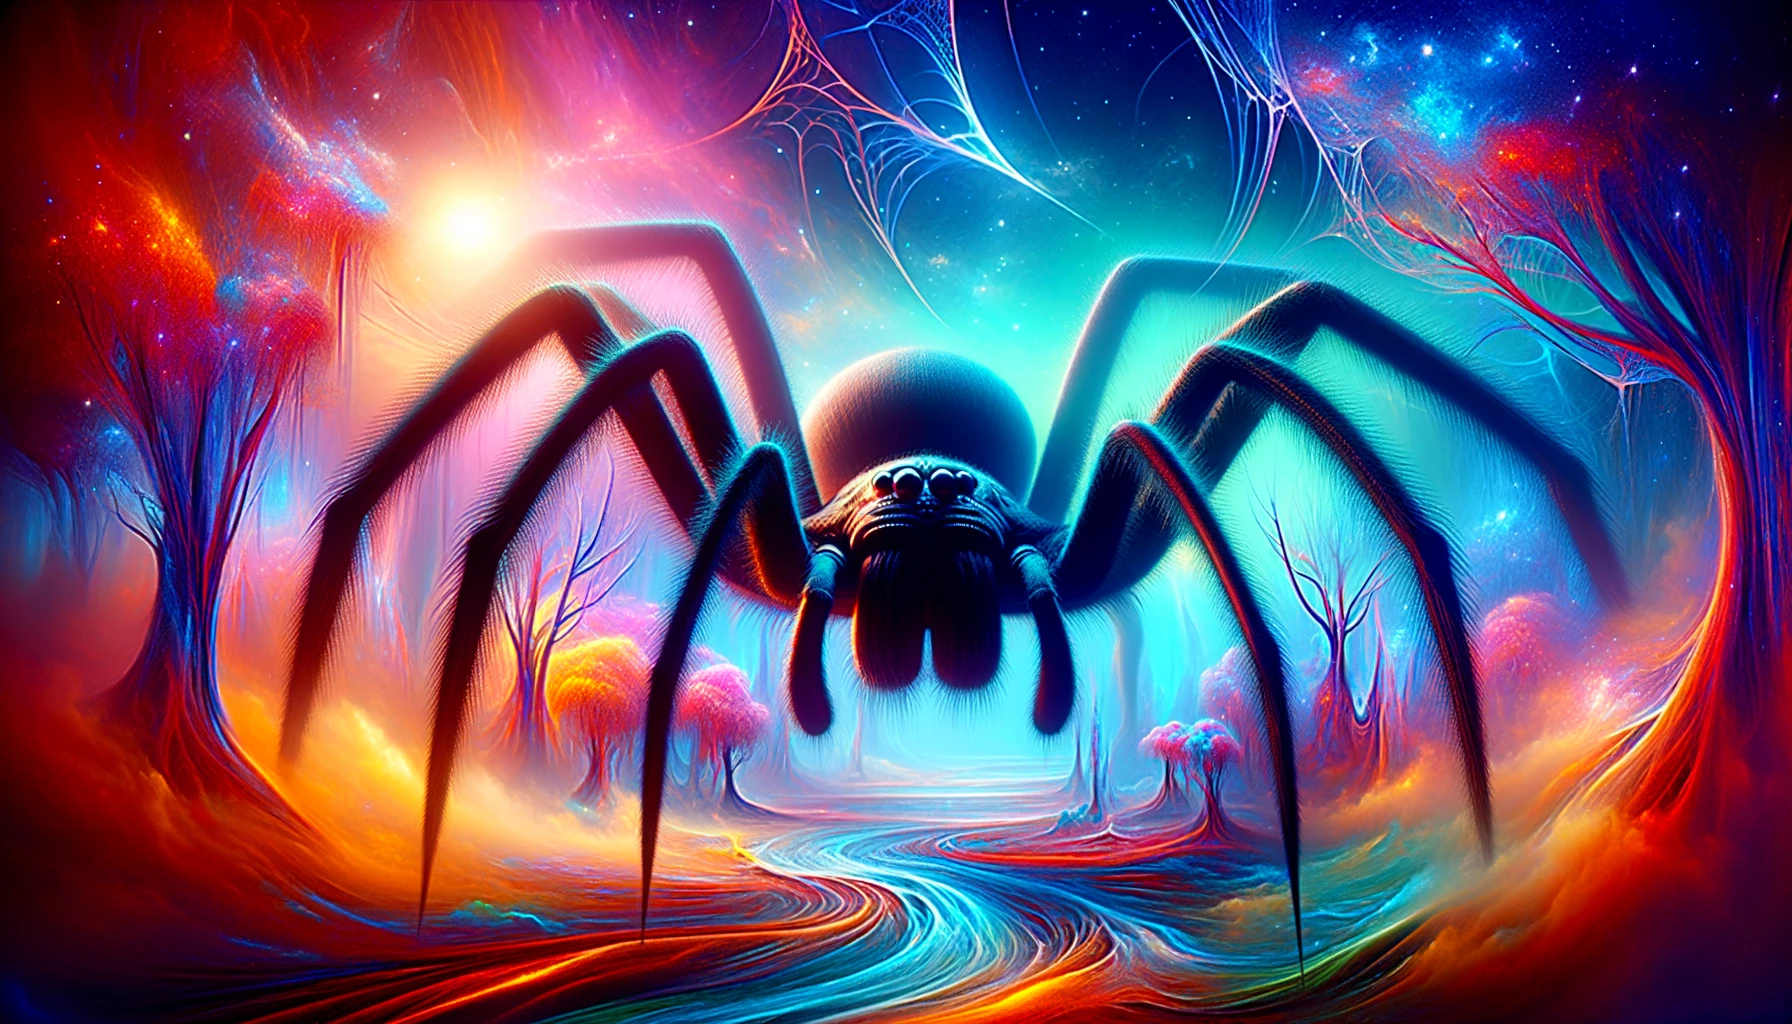 A surreal and haunting image of a giant spider from a dream. The spider is enormous, with long, spindly legs and a dark, menacing body. Its eyes glow